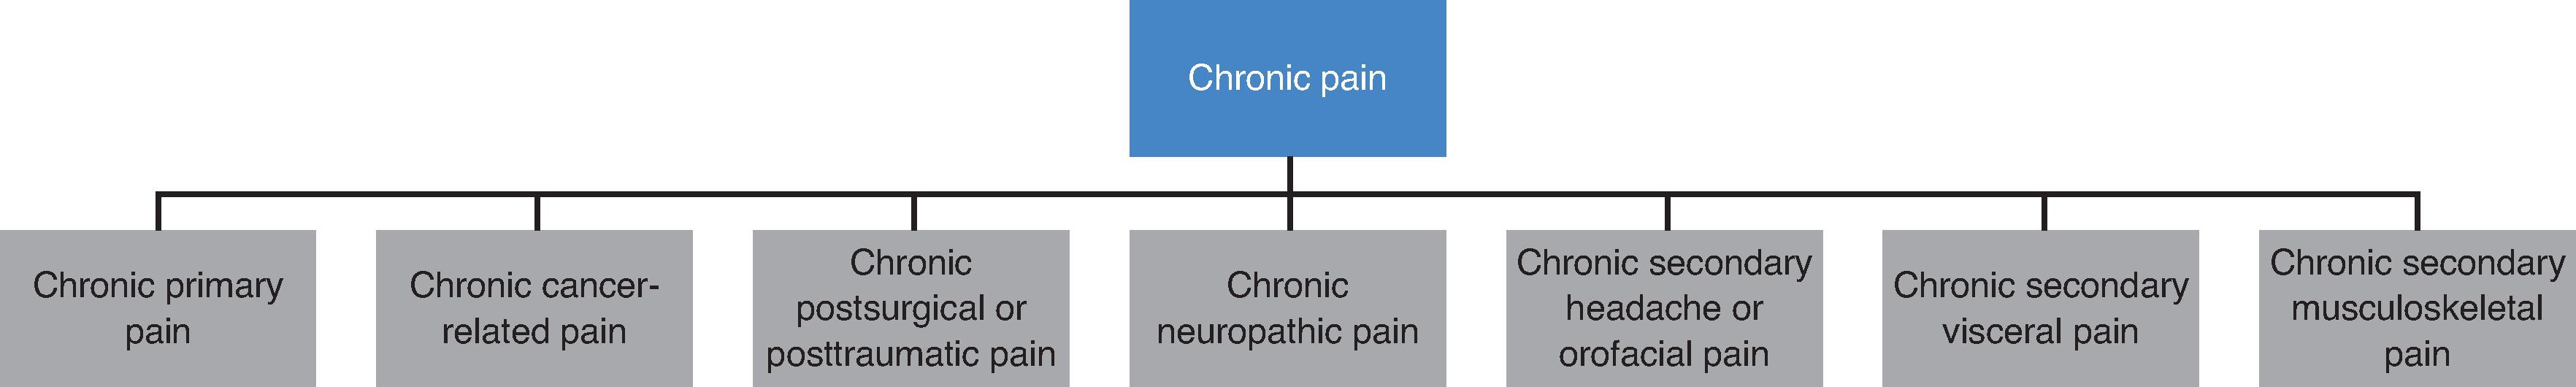 Figure 2.1, International Classification of Diseases (ICD)-11 chronic pain terms.